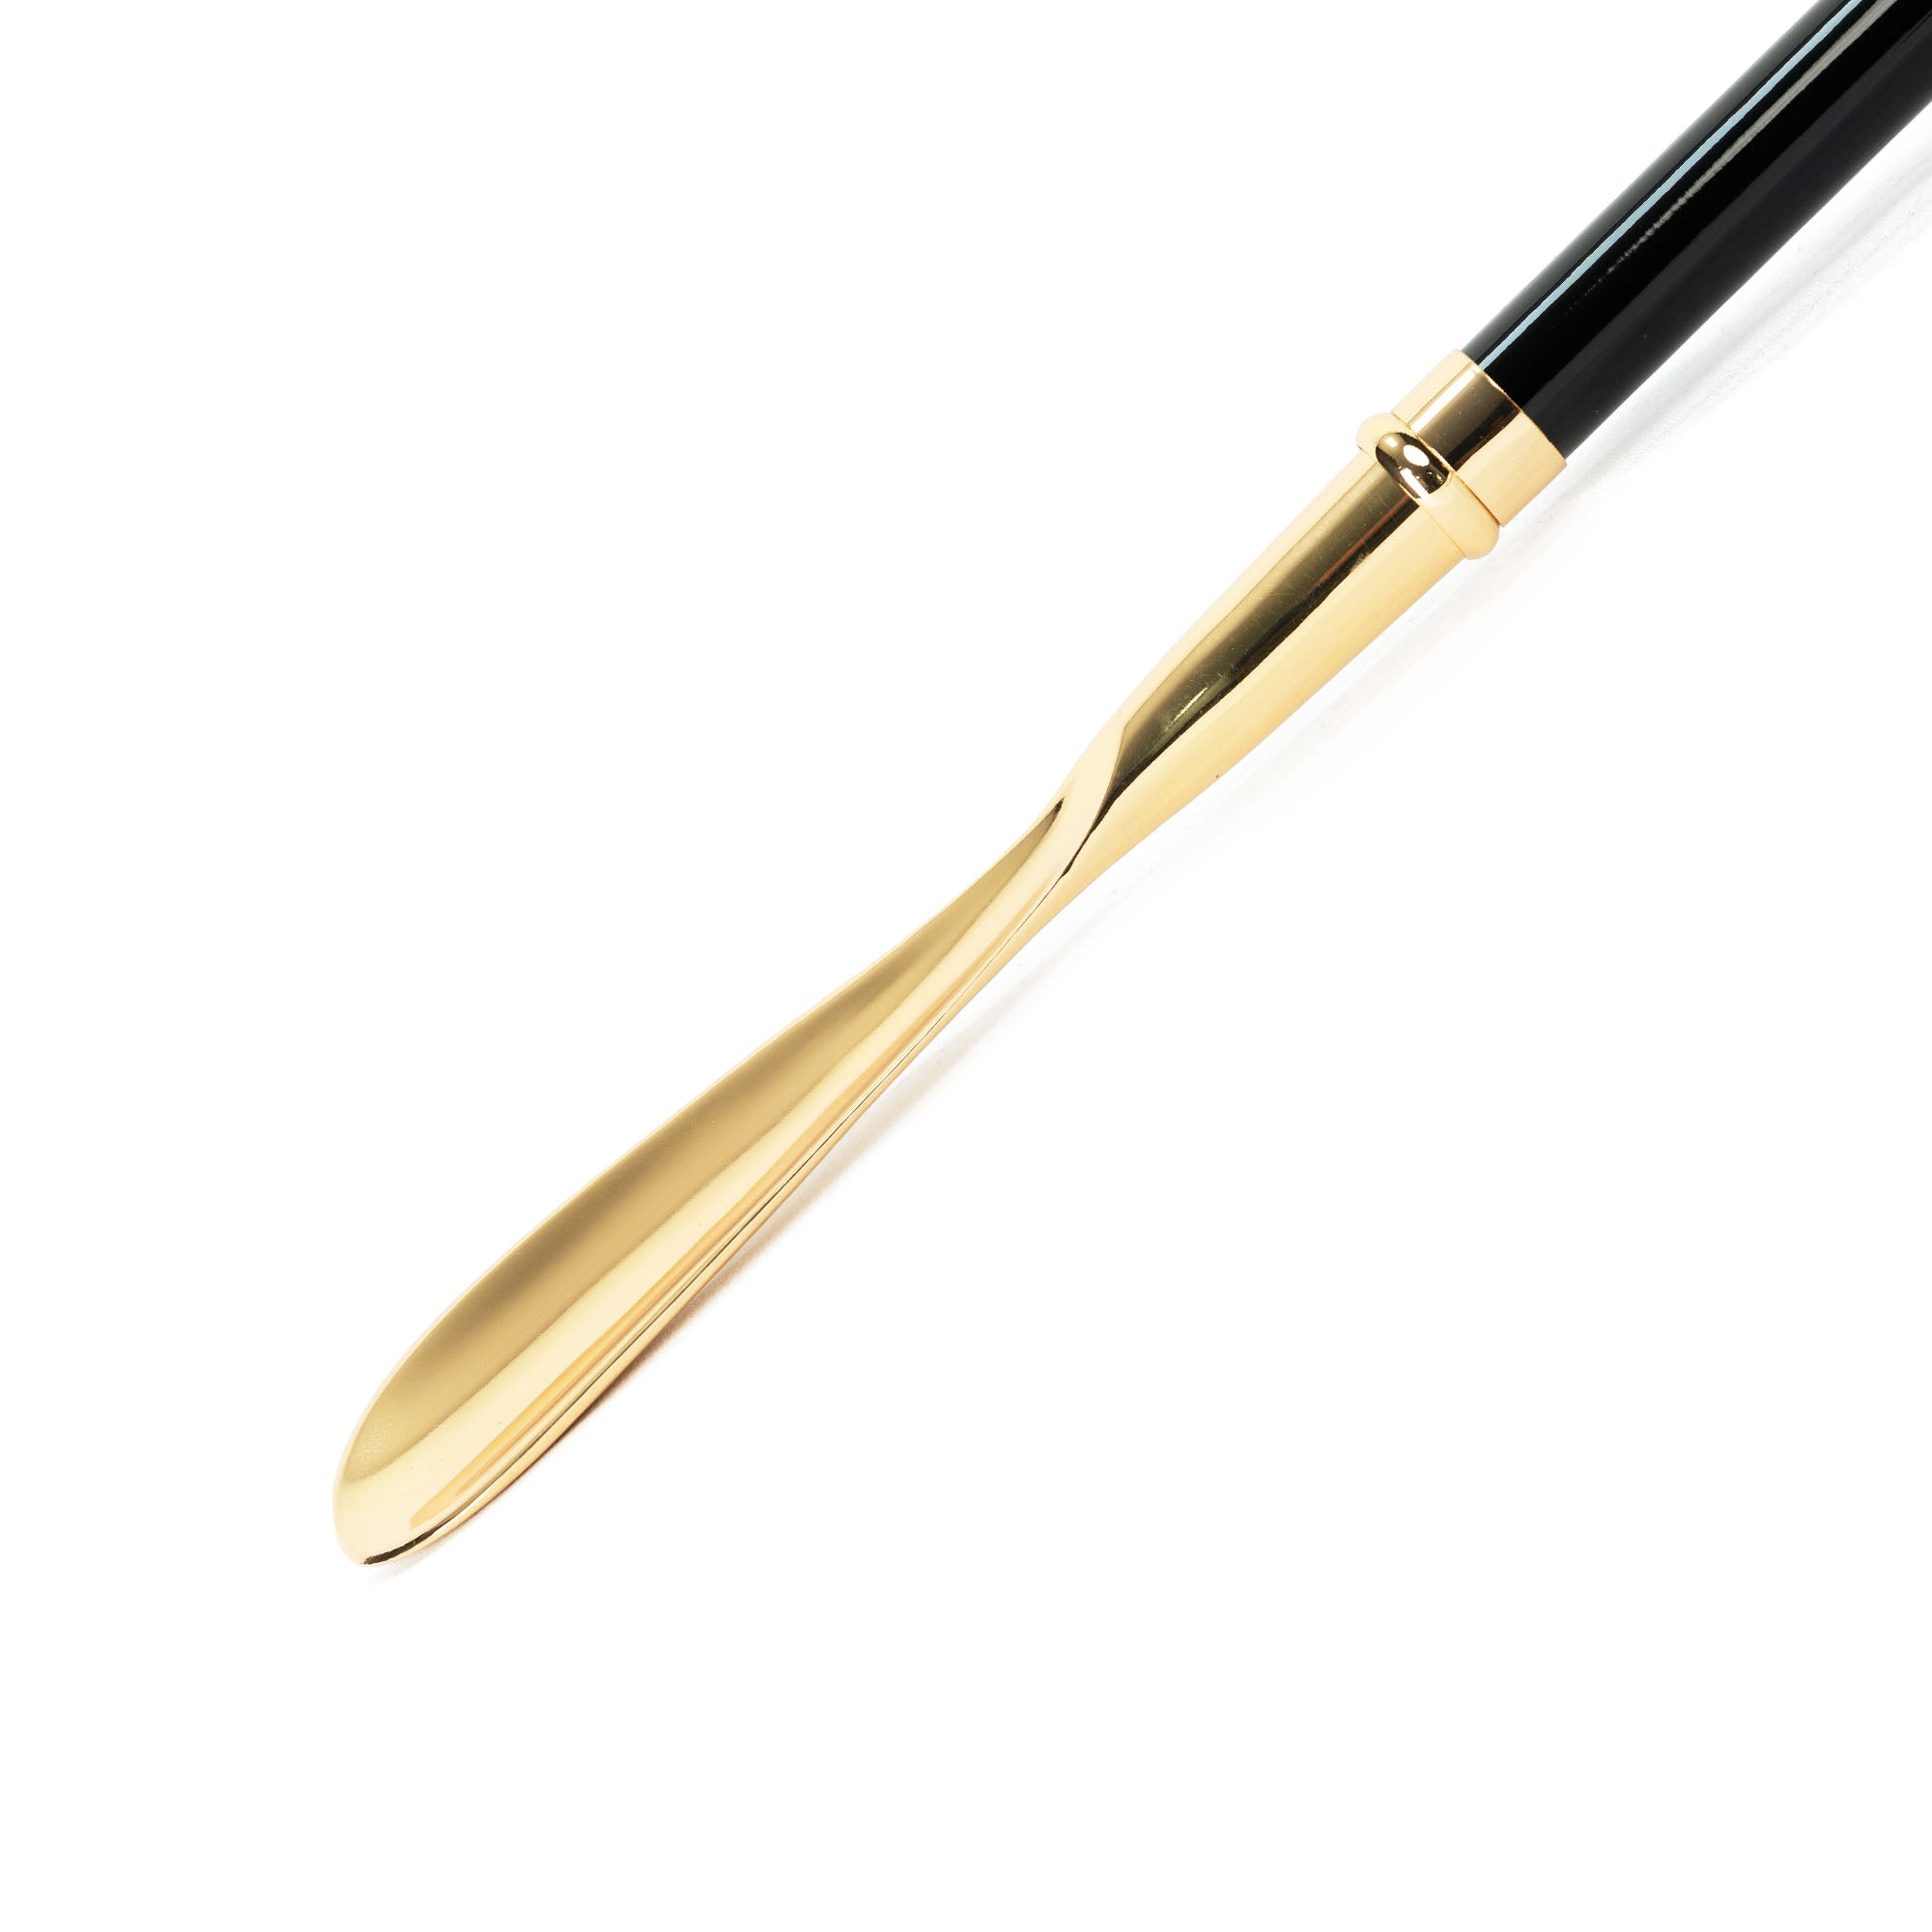 Golden Treasure: 24K Gold-Plated Shoehorn with Crystal